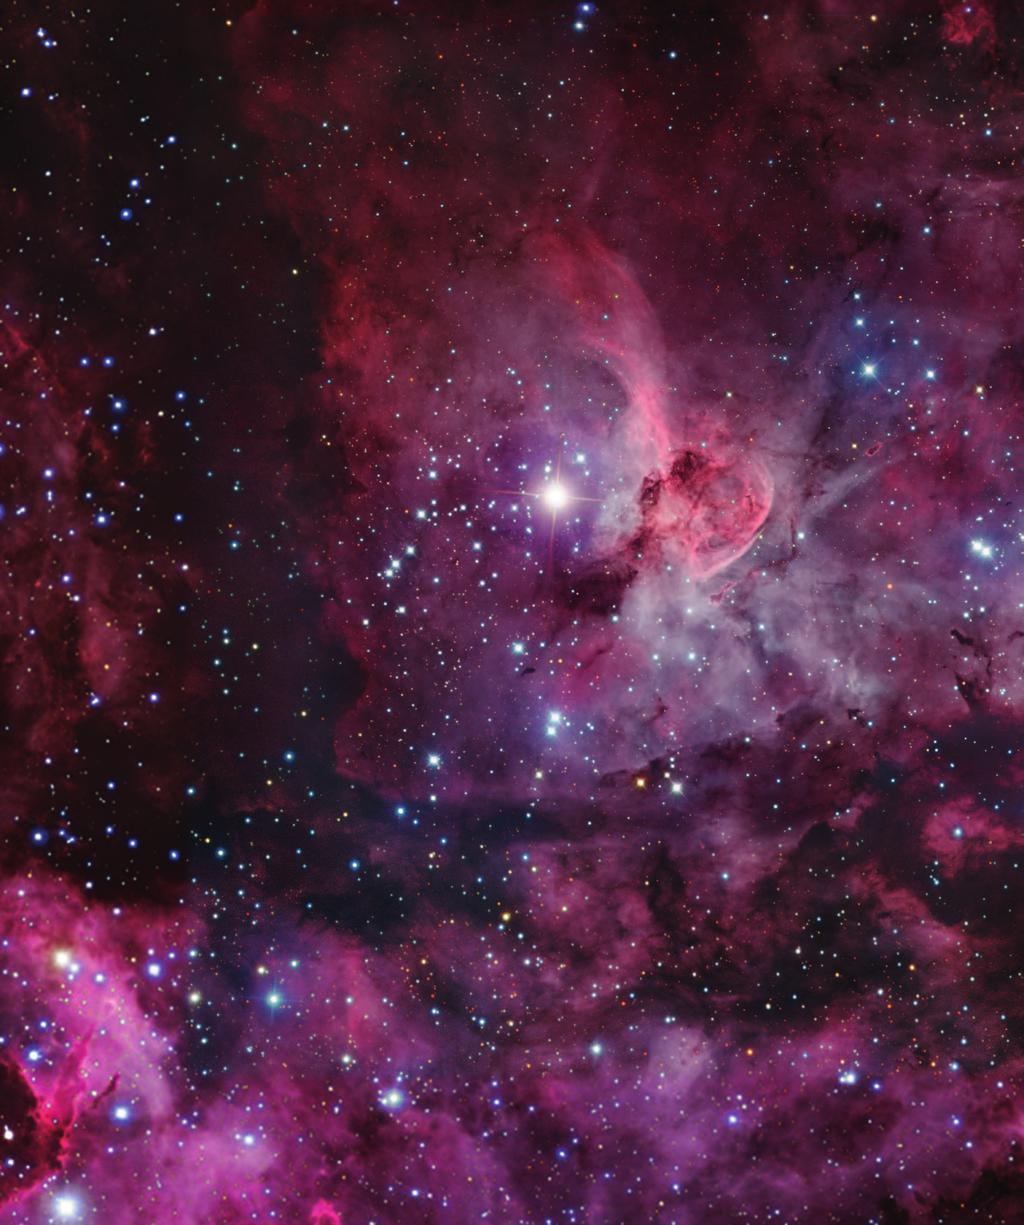 Panoramic View of the Central Part of the Carina Nebula This spectacular panoramic view shows the central part of the Carina Nebula, which includes the exotic star Eta Carinae, the well-known